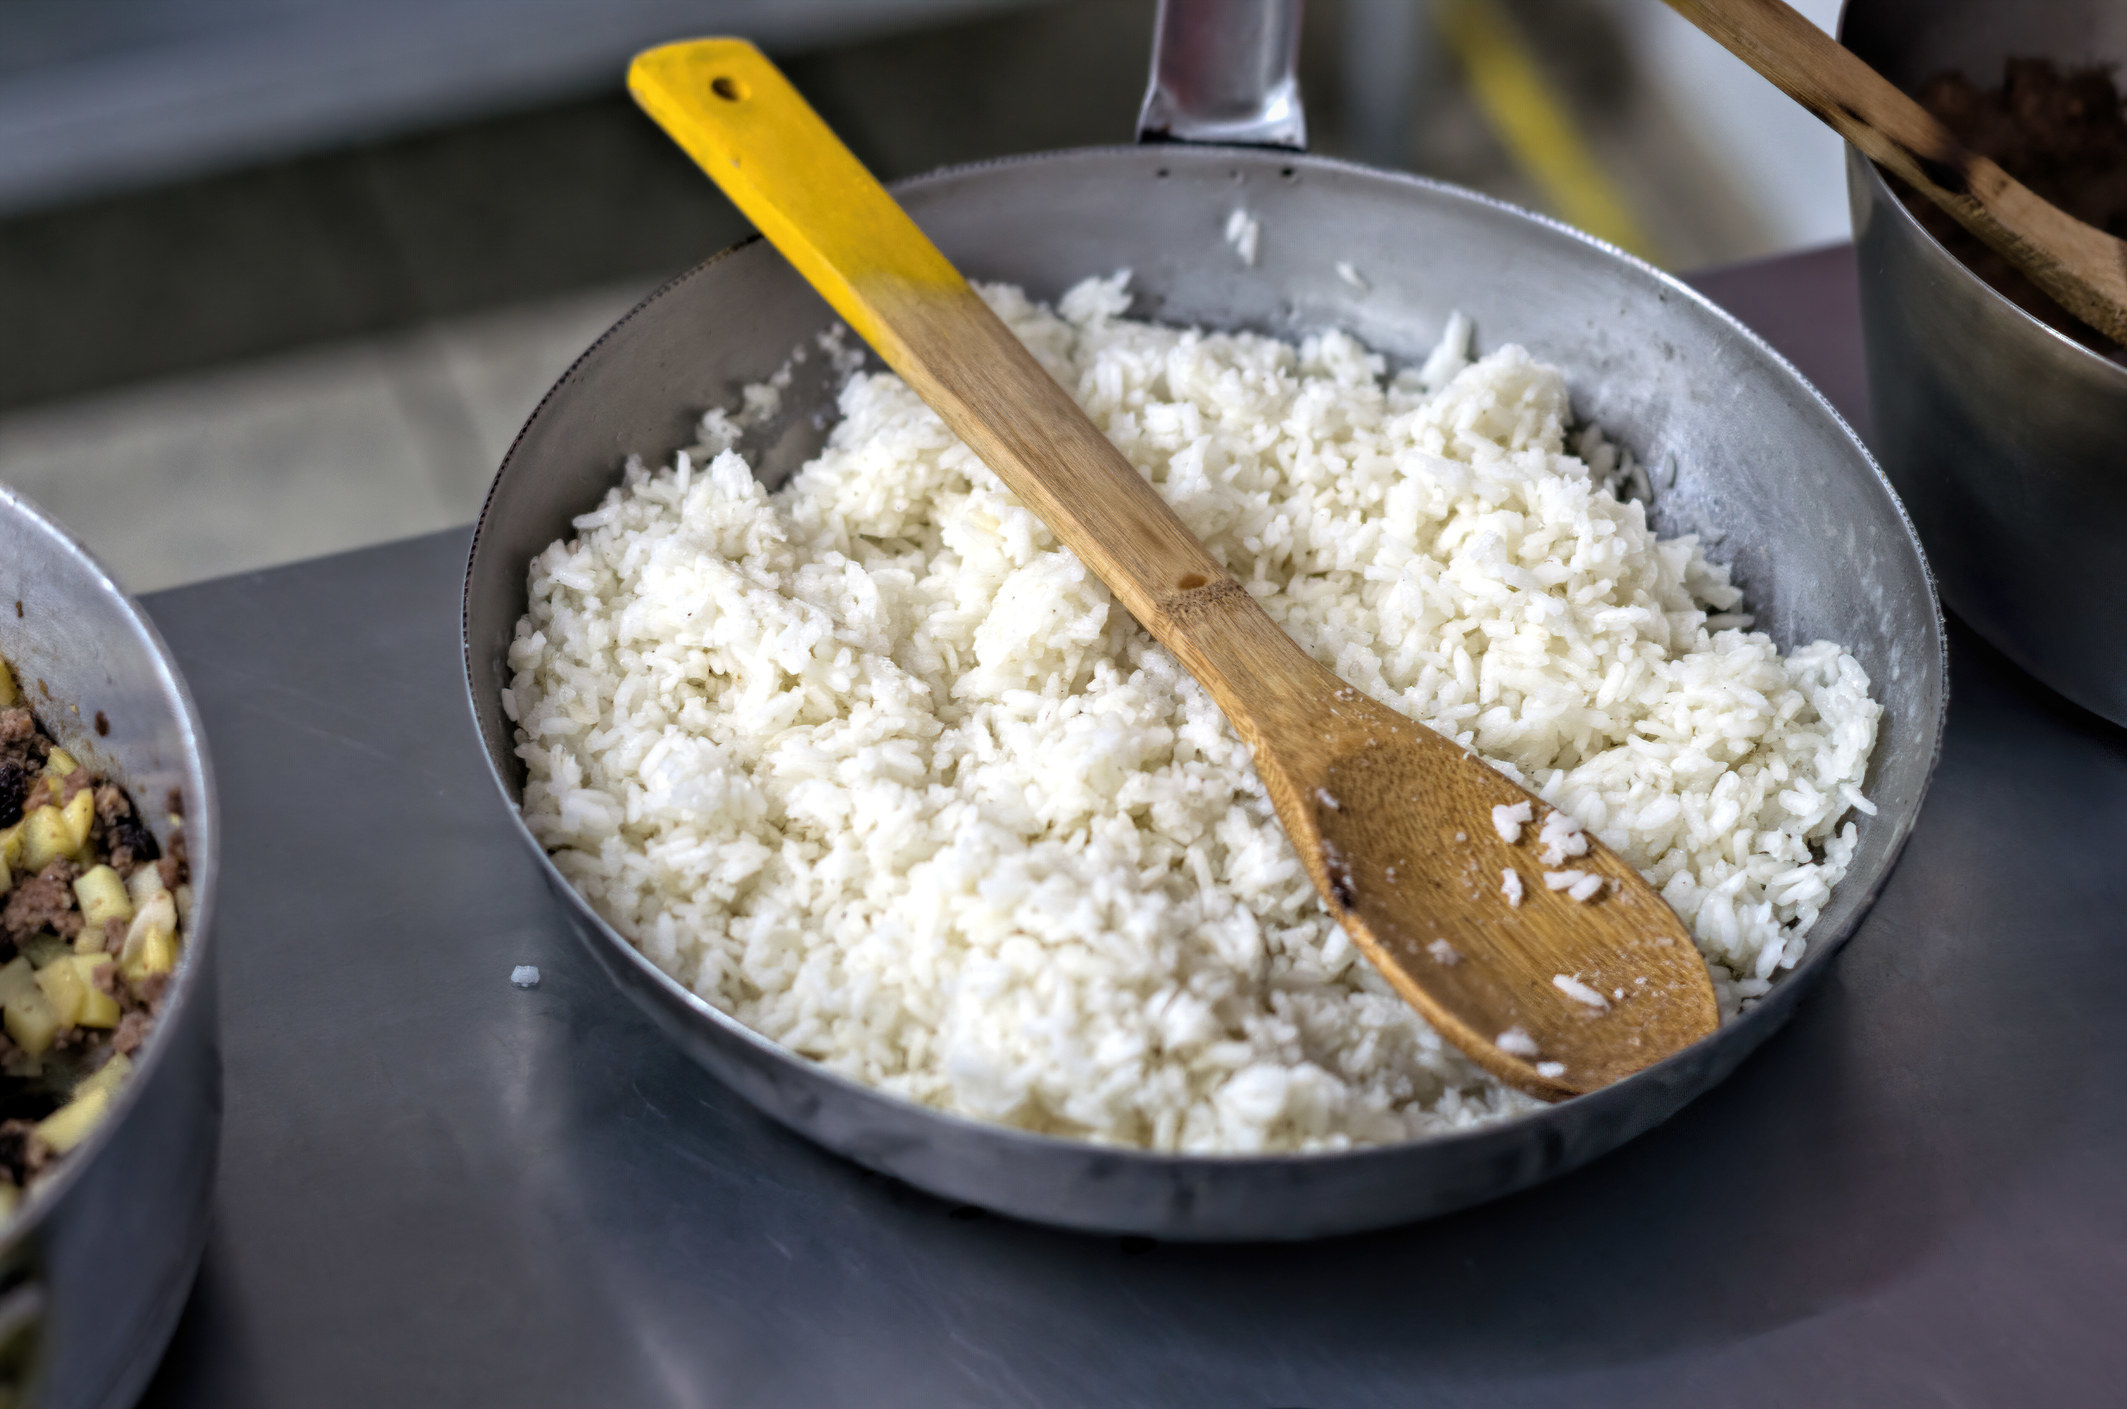 A skillet of white rice.